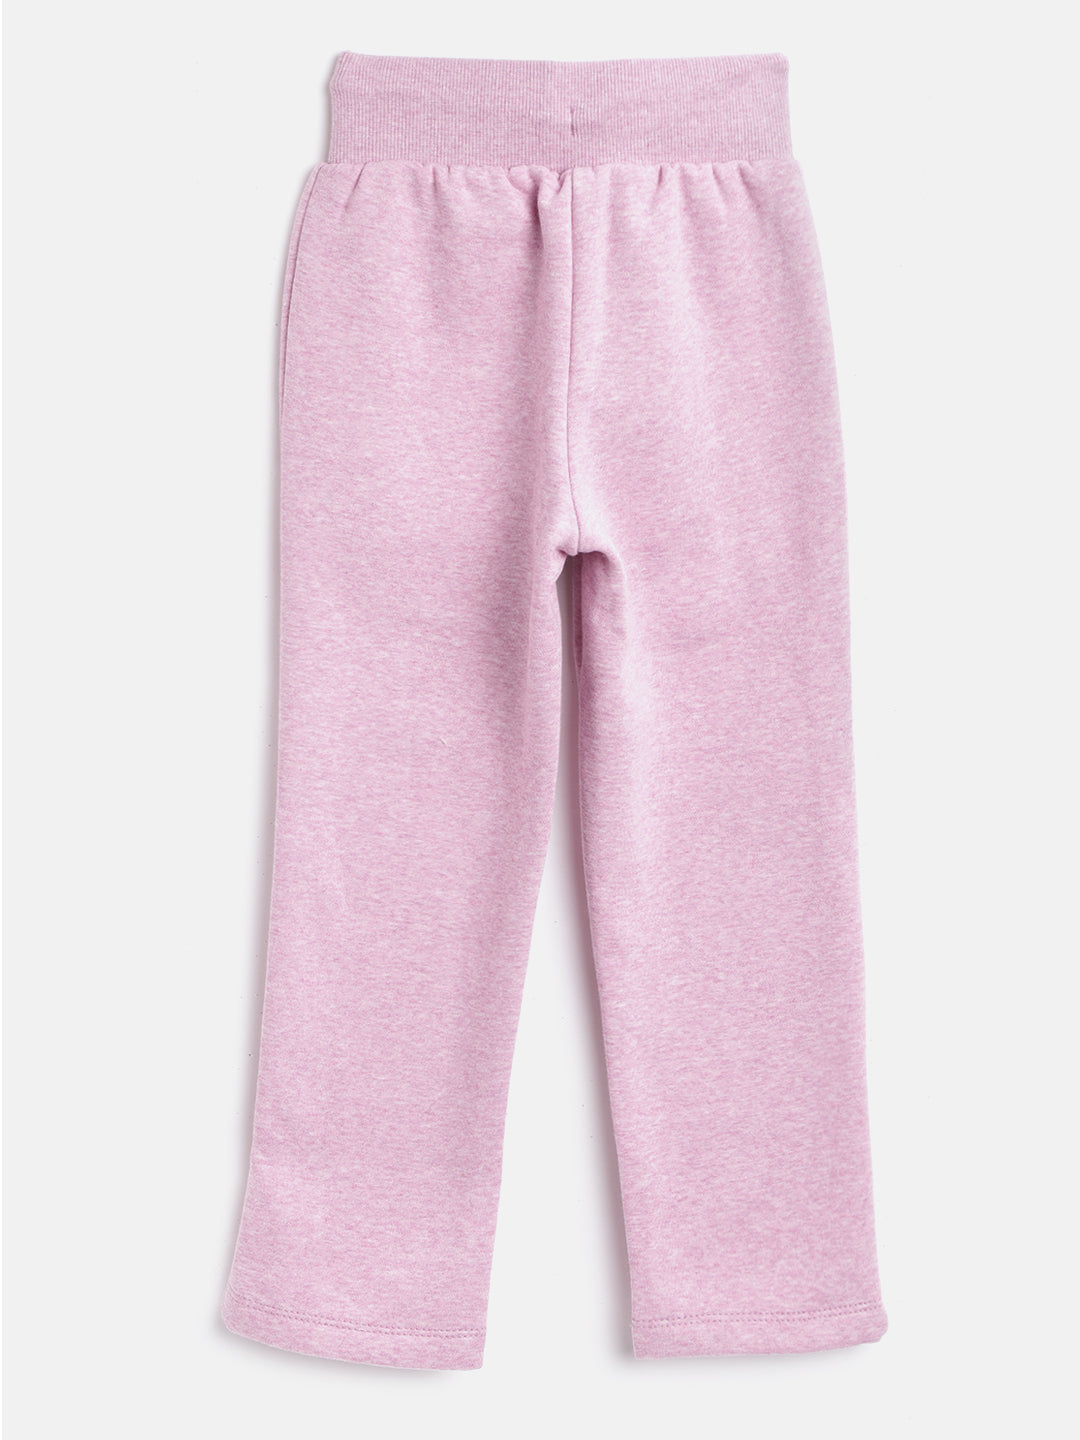 Alcis Girls Pink Solid Knitted Track Pants